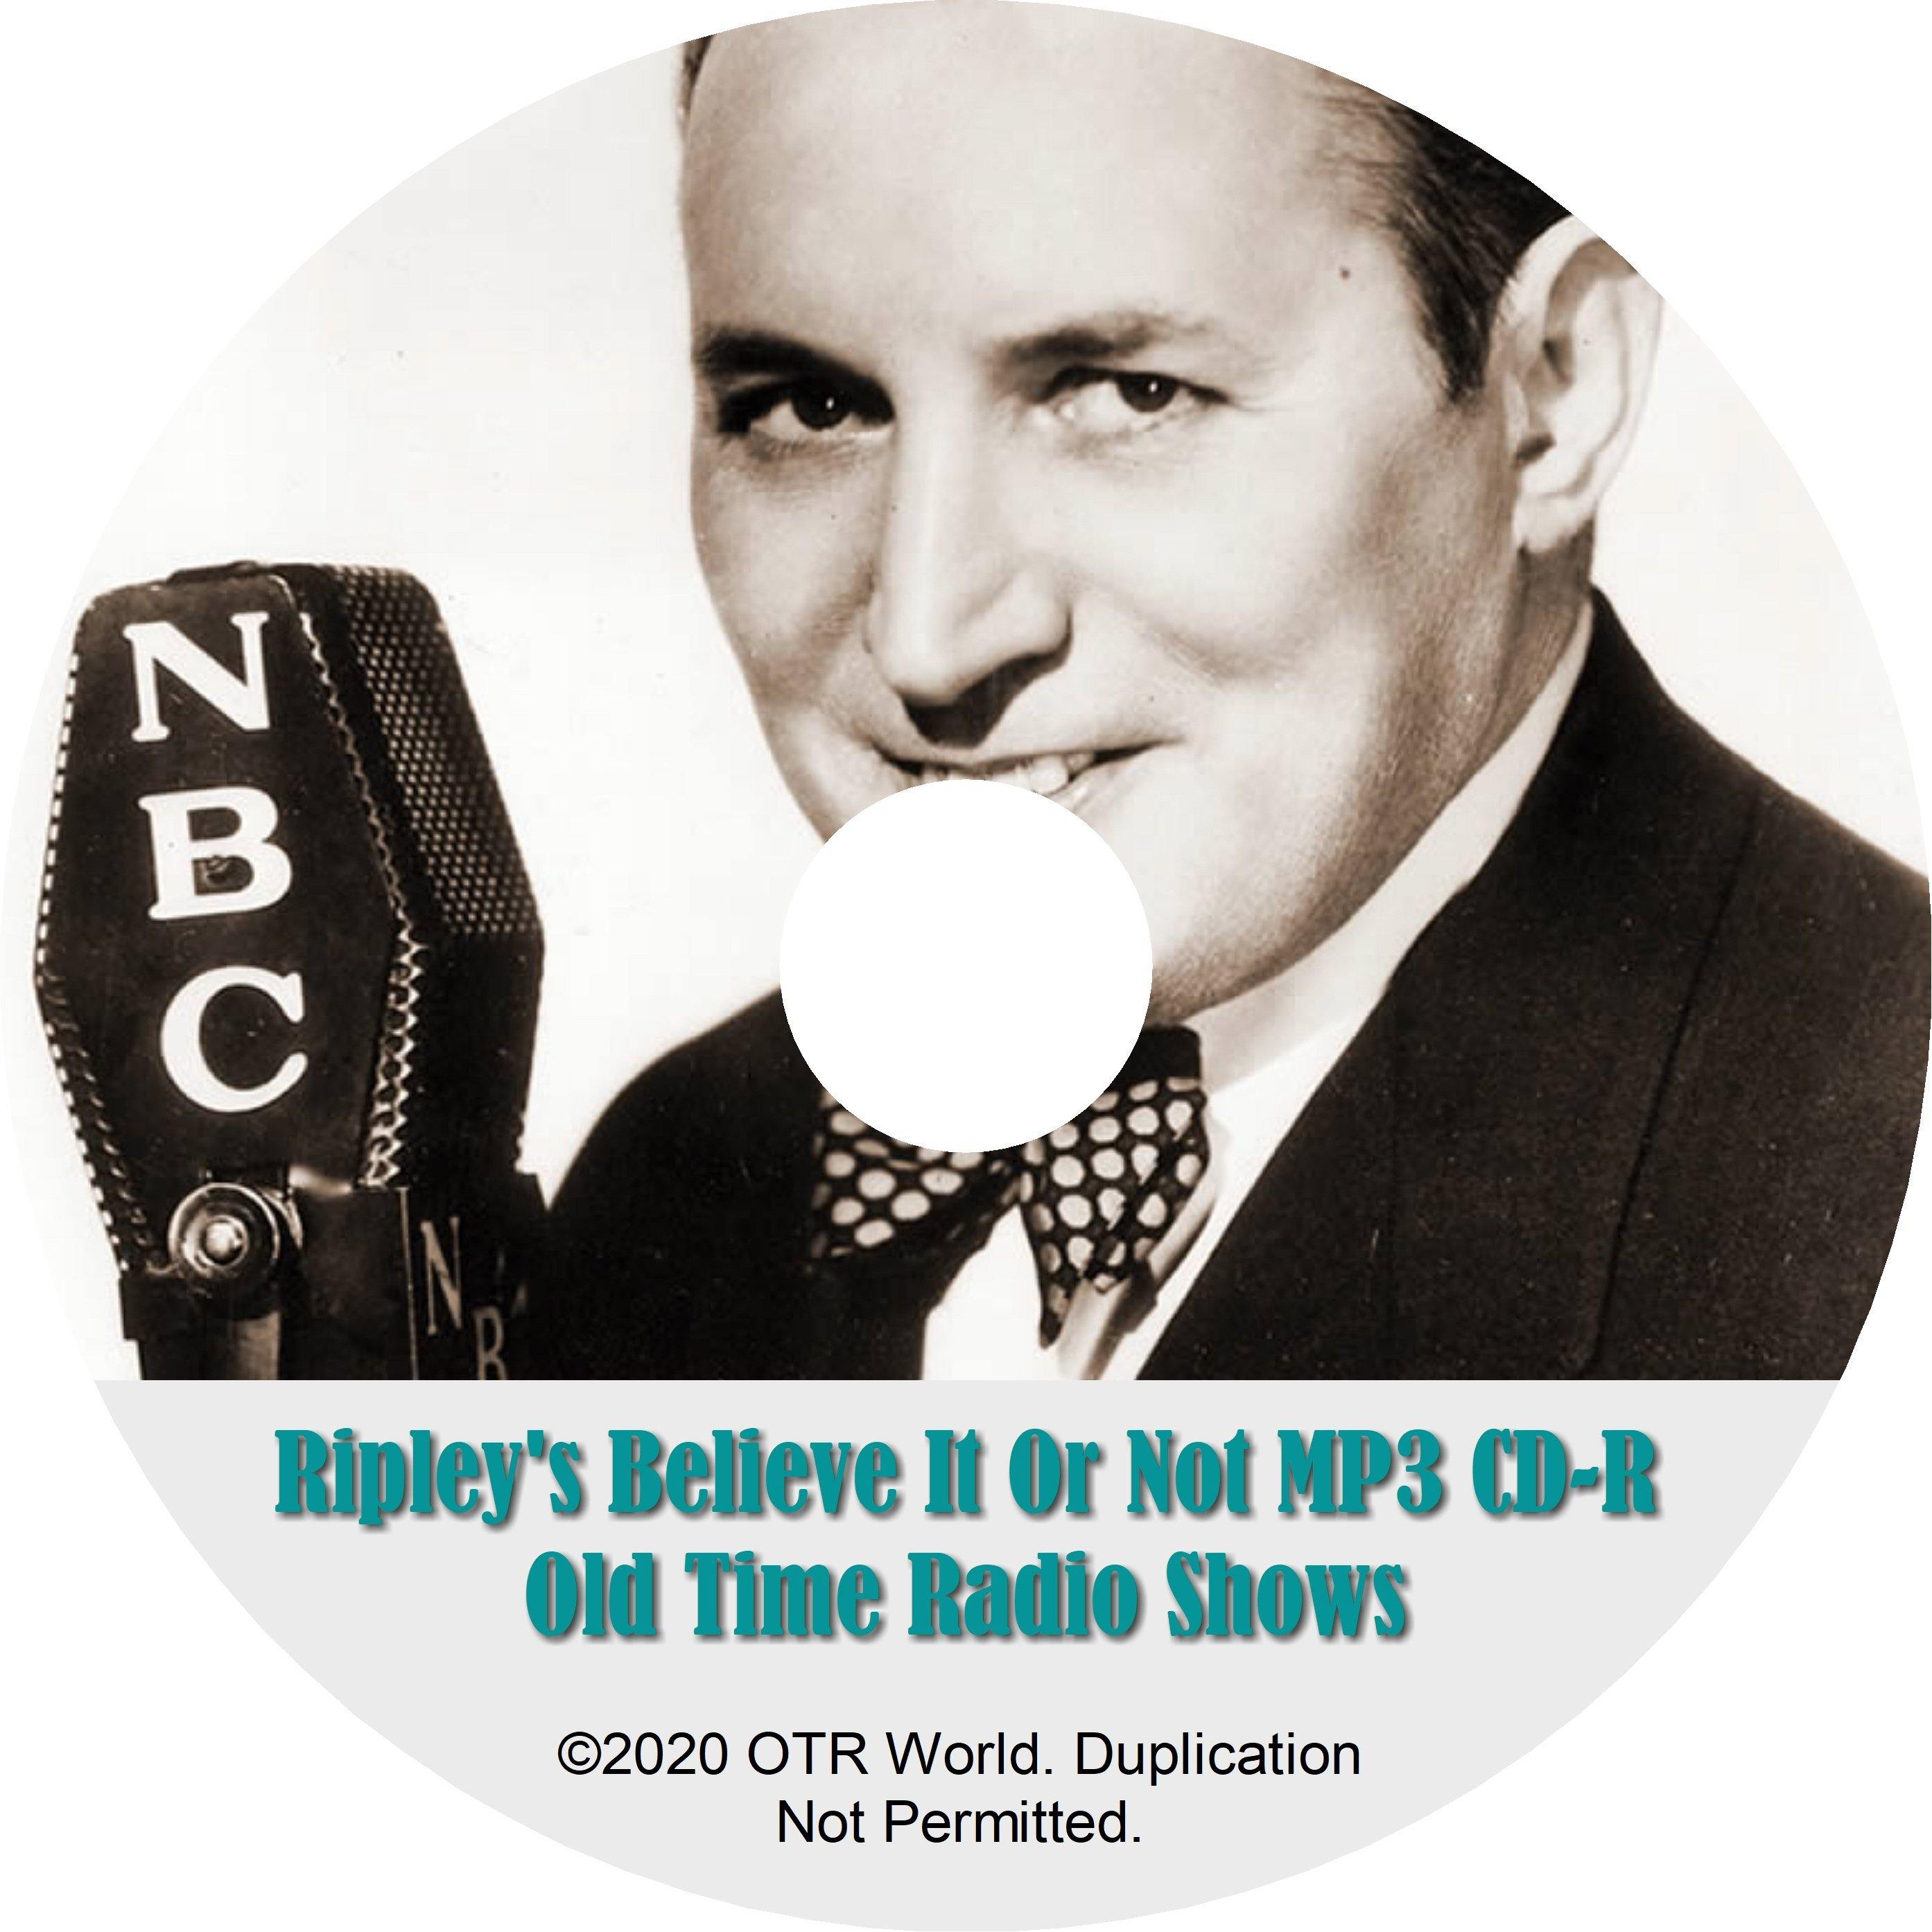 Ripley's Believe It Or Not OTR Old Time Radio Shows MP3 On CD-R 418 Episodes - OTR World